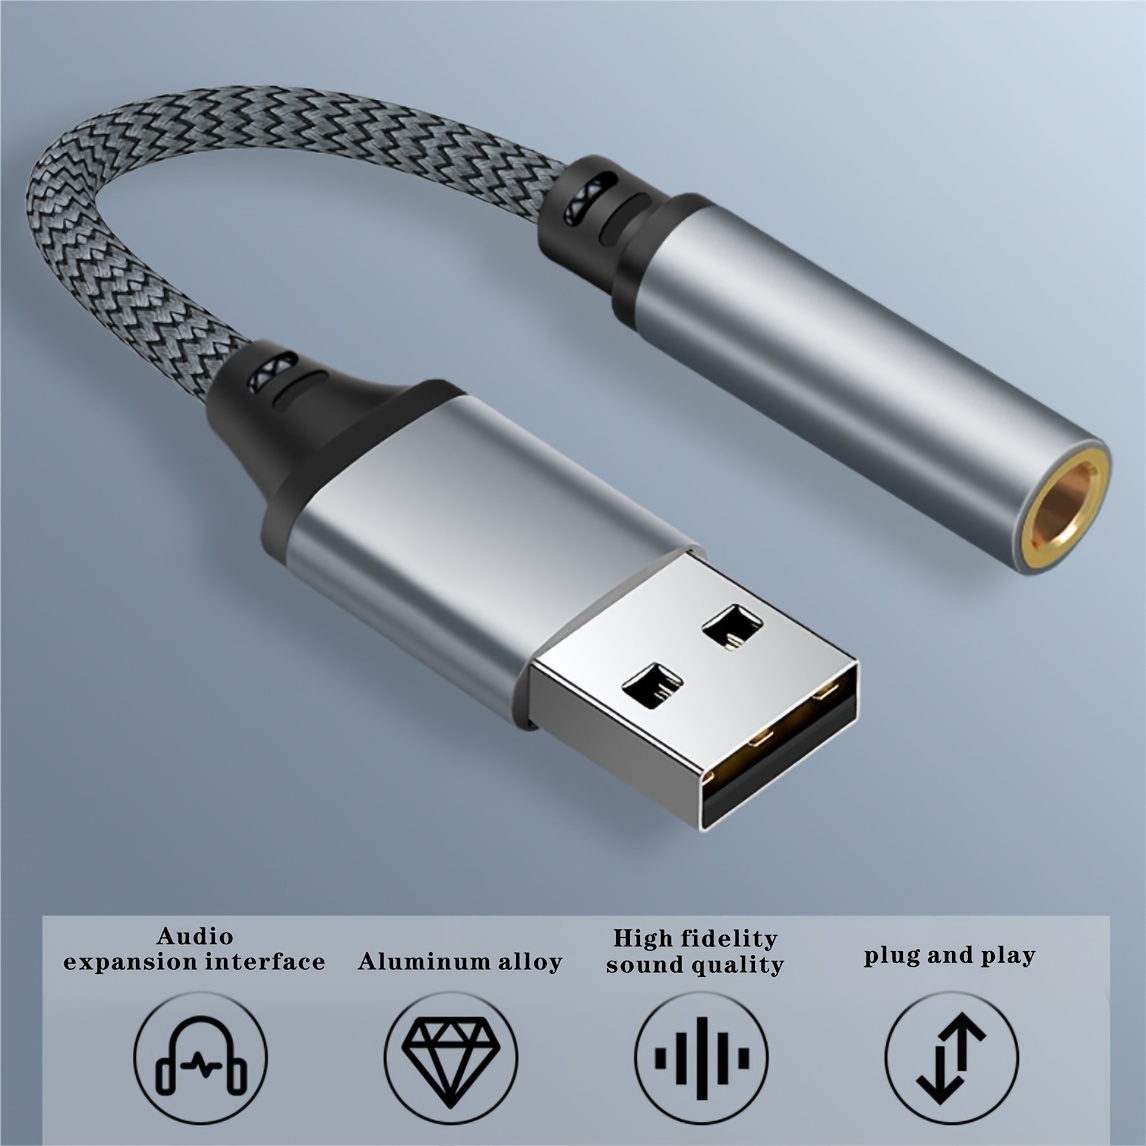 USB To 3.5mm Audio Jack Adapter, USB Type C External Stereo Sound Adapter  for Windows and Mac. Plug and Play No Drivers Needed.